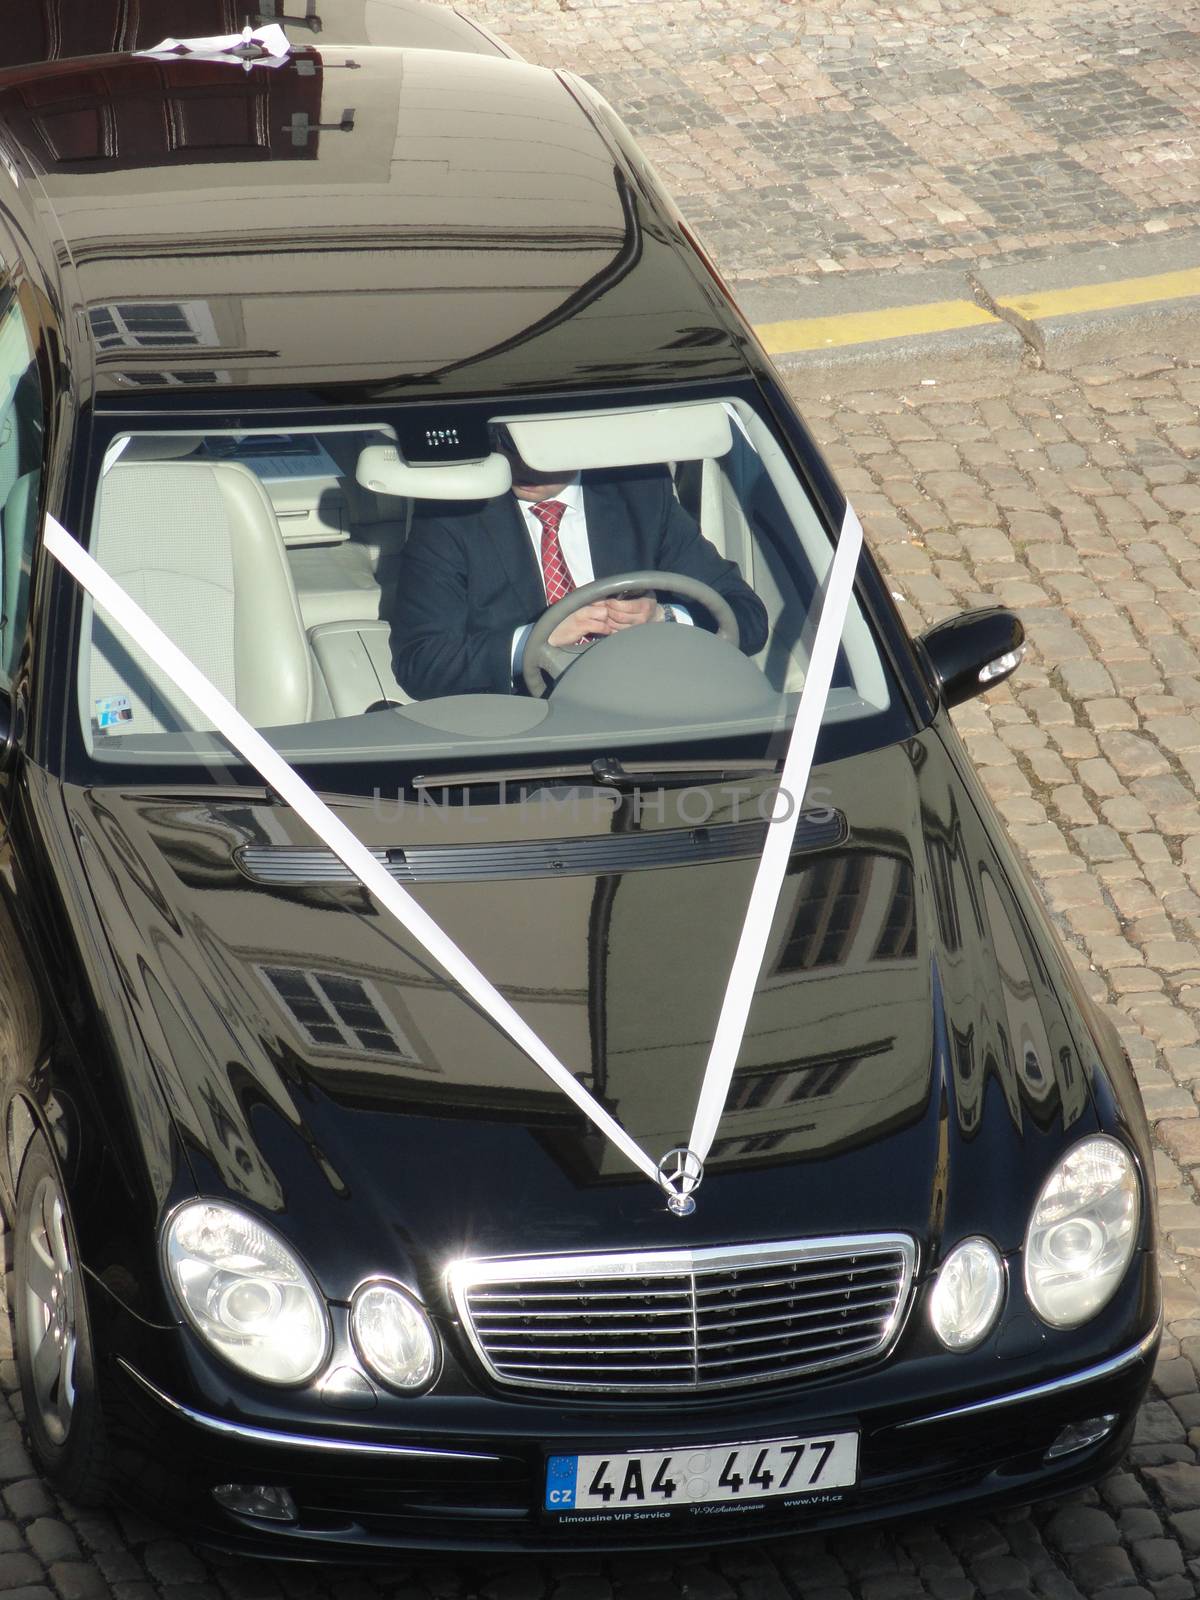 Prague, Czech Republic - February 15 2011: Black Mercedes Wedding Car. The Limo driver was waiting for the Married Couple